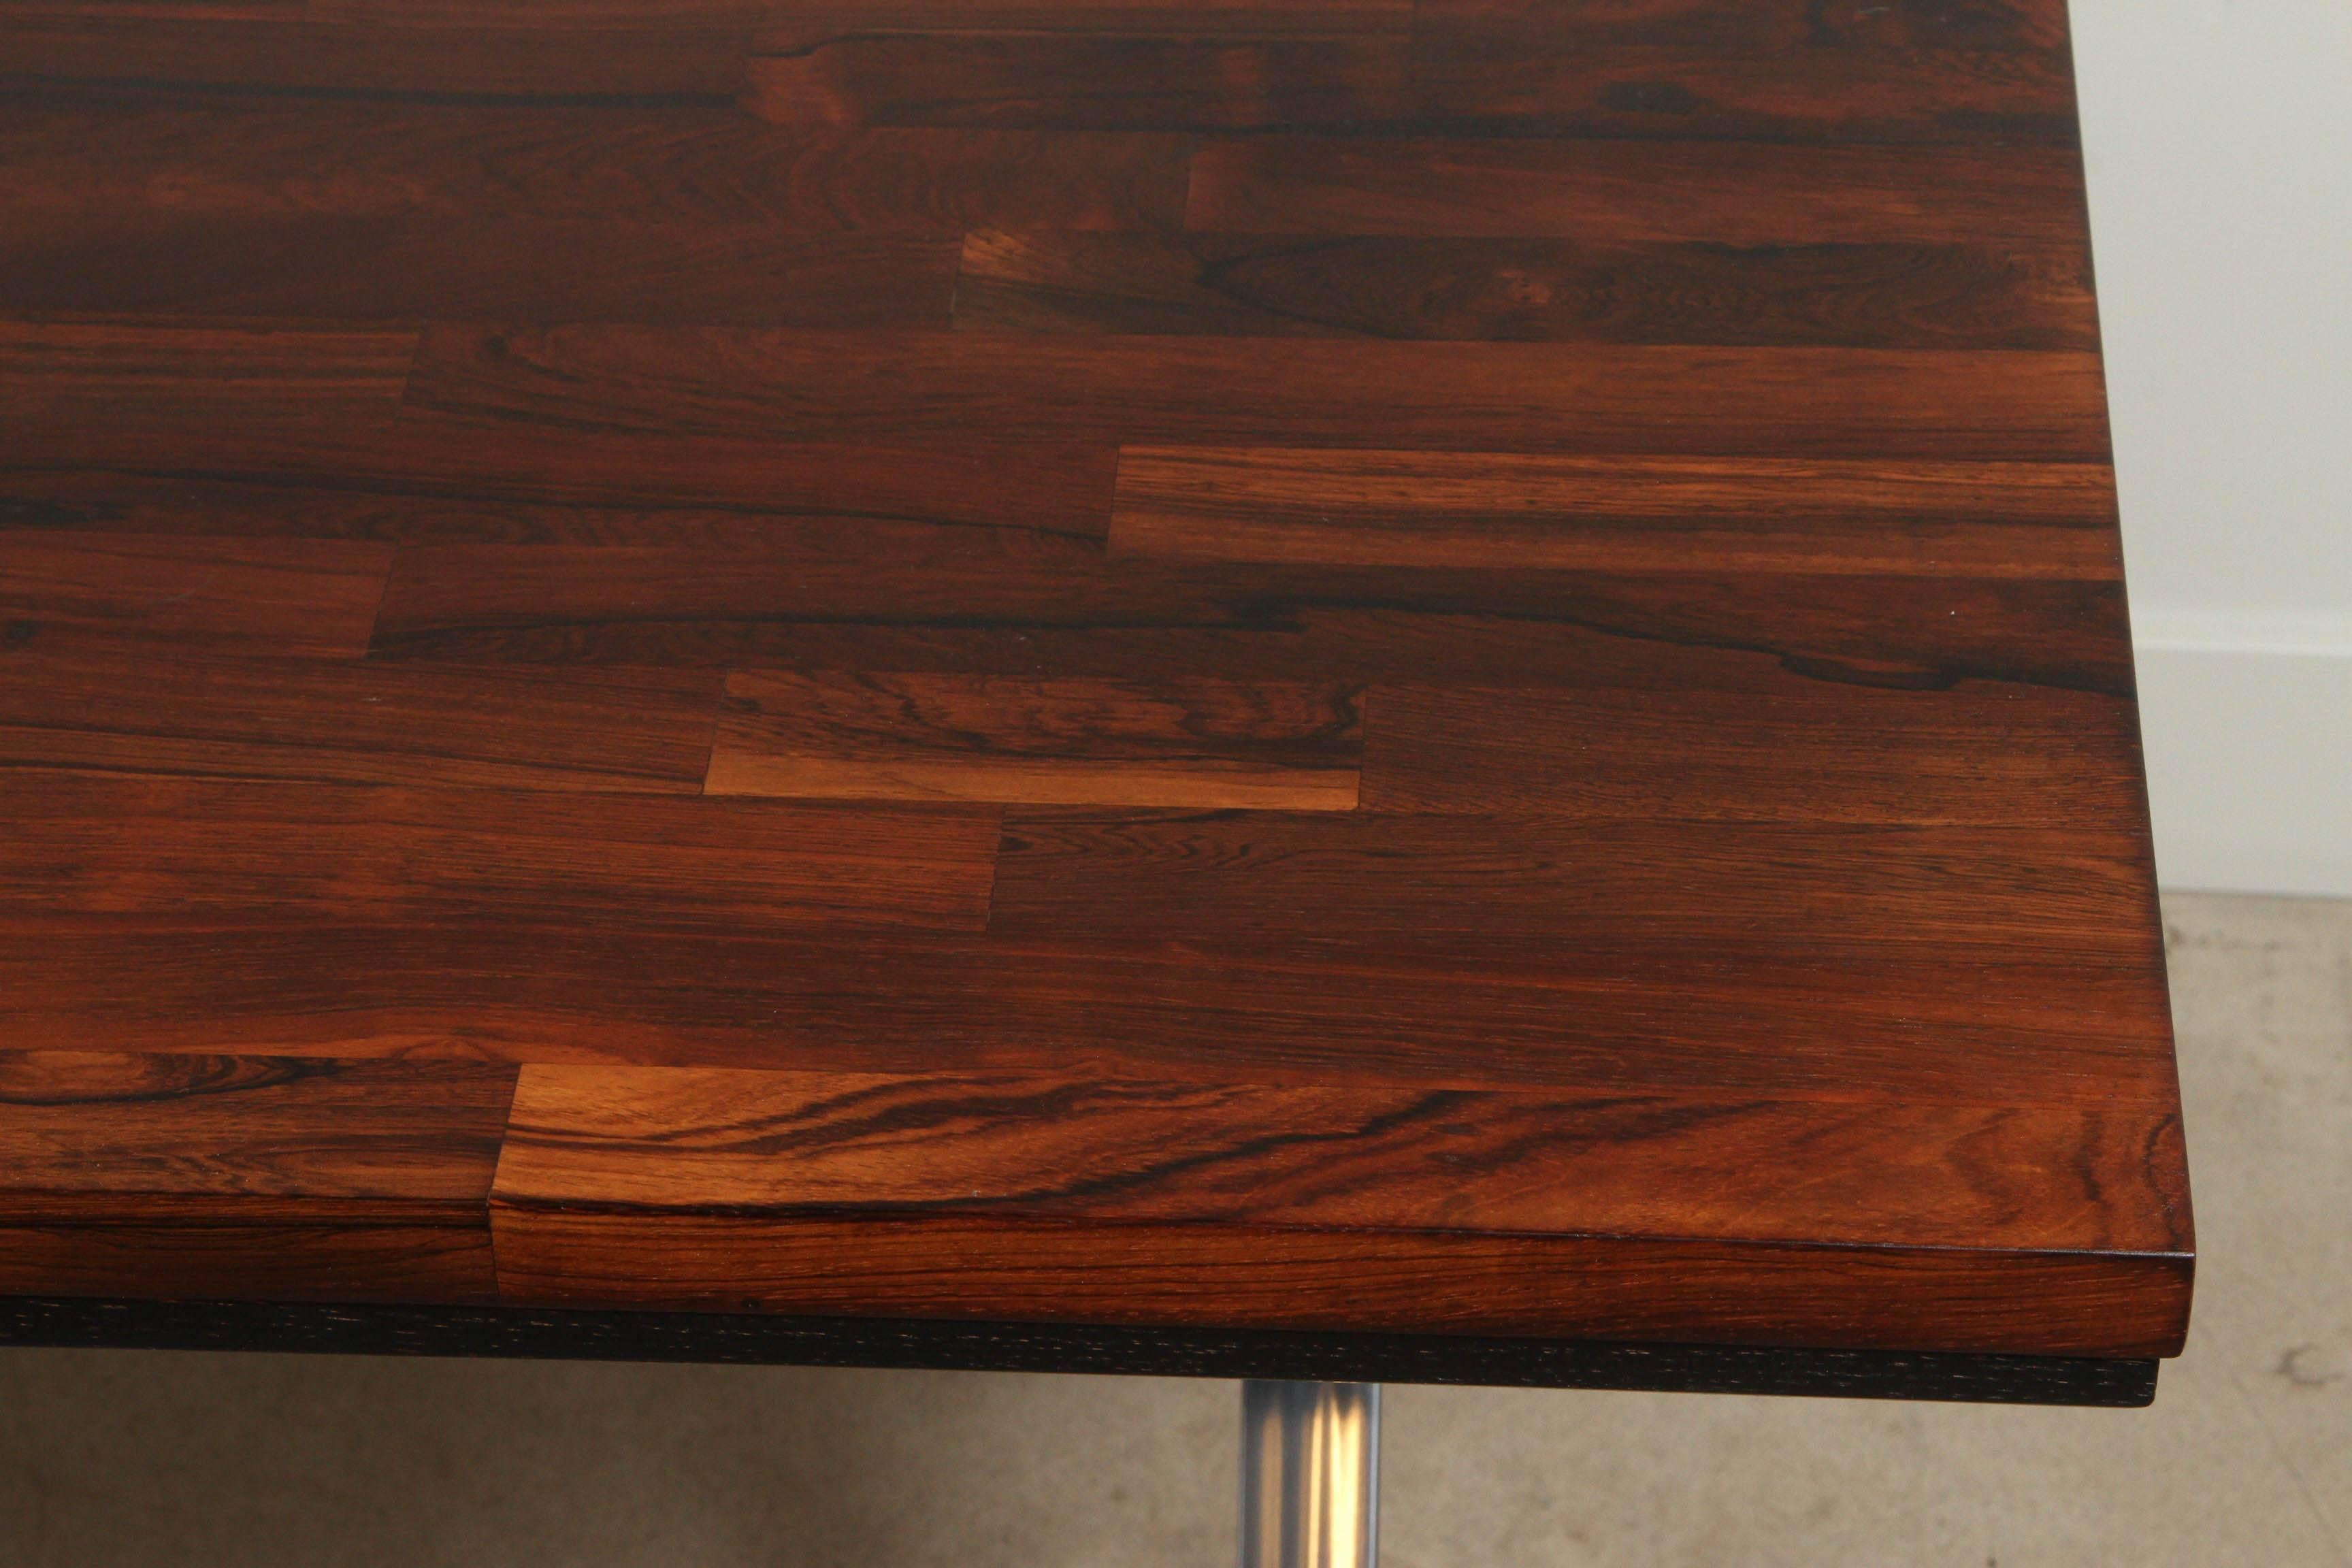 Solid rosewood desk with stainless base by Jules Heumann for Metropolitan Group.